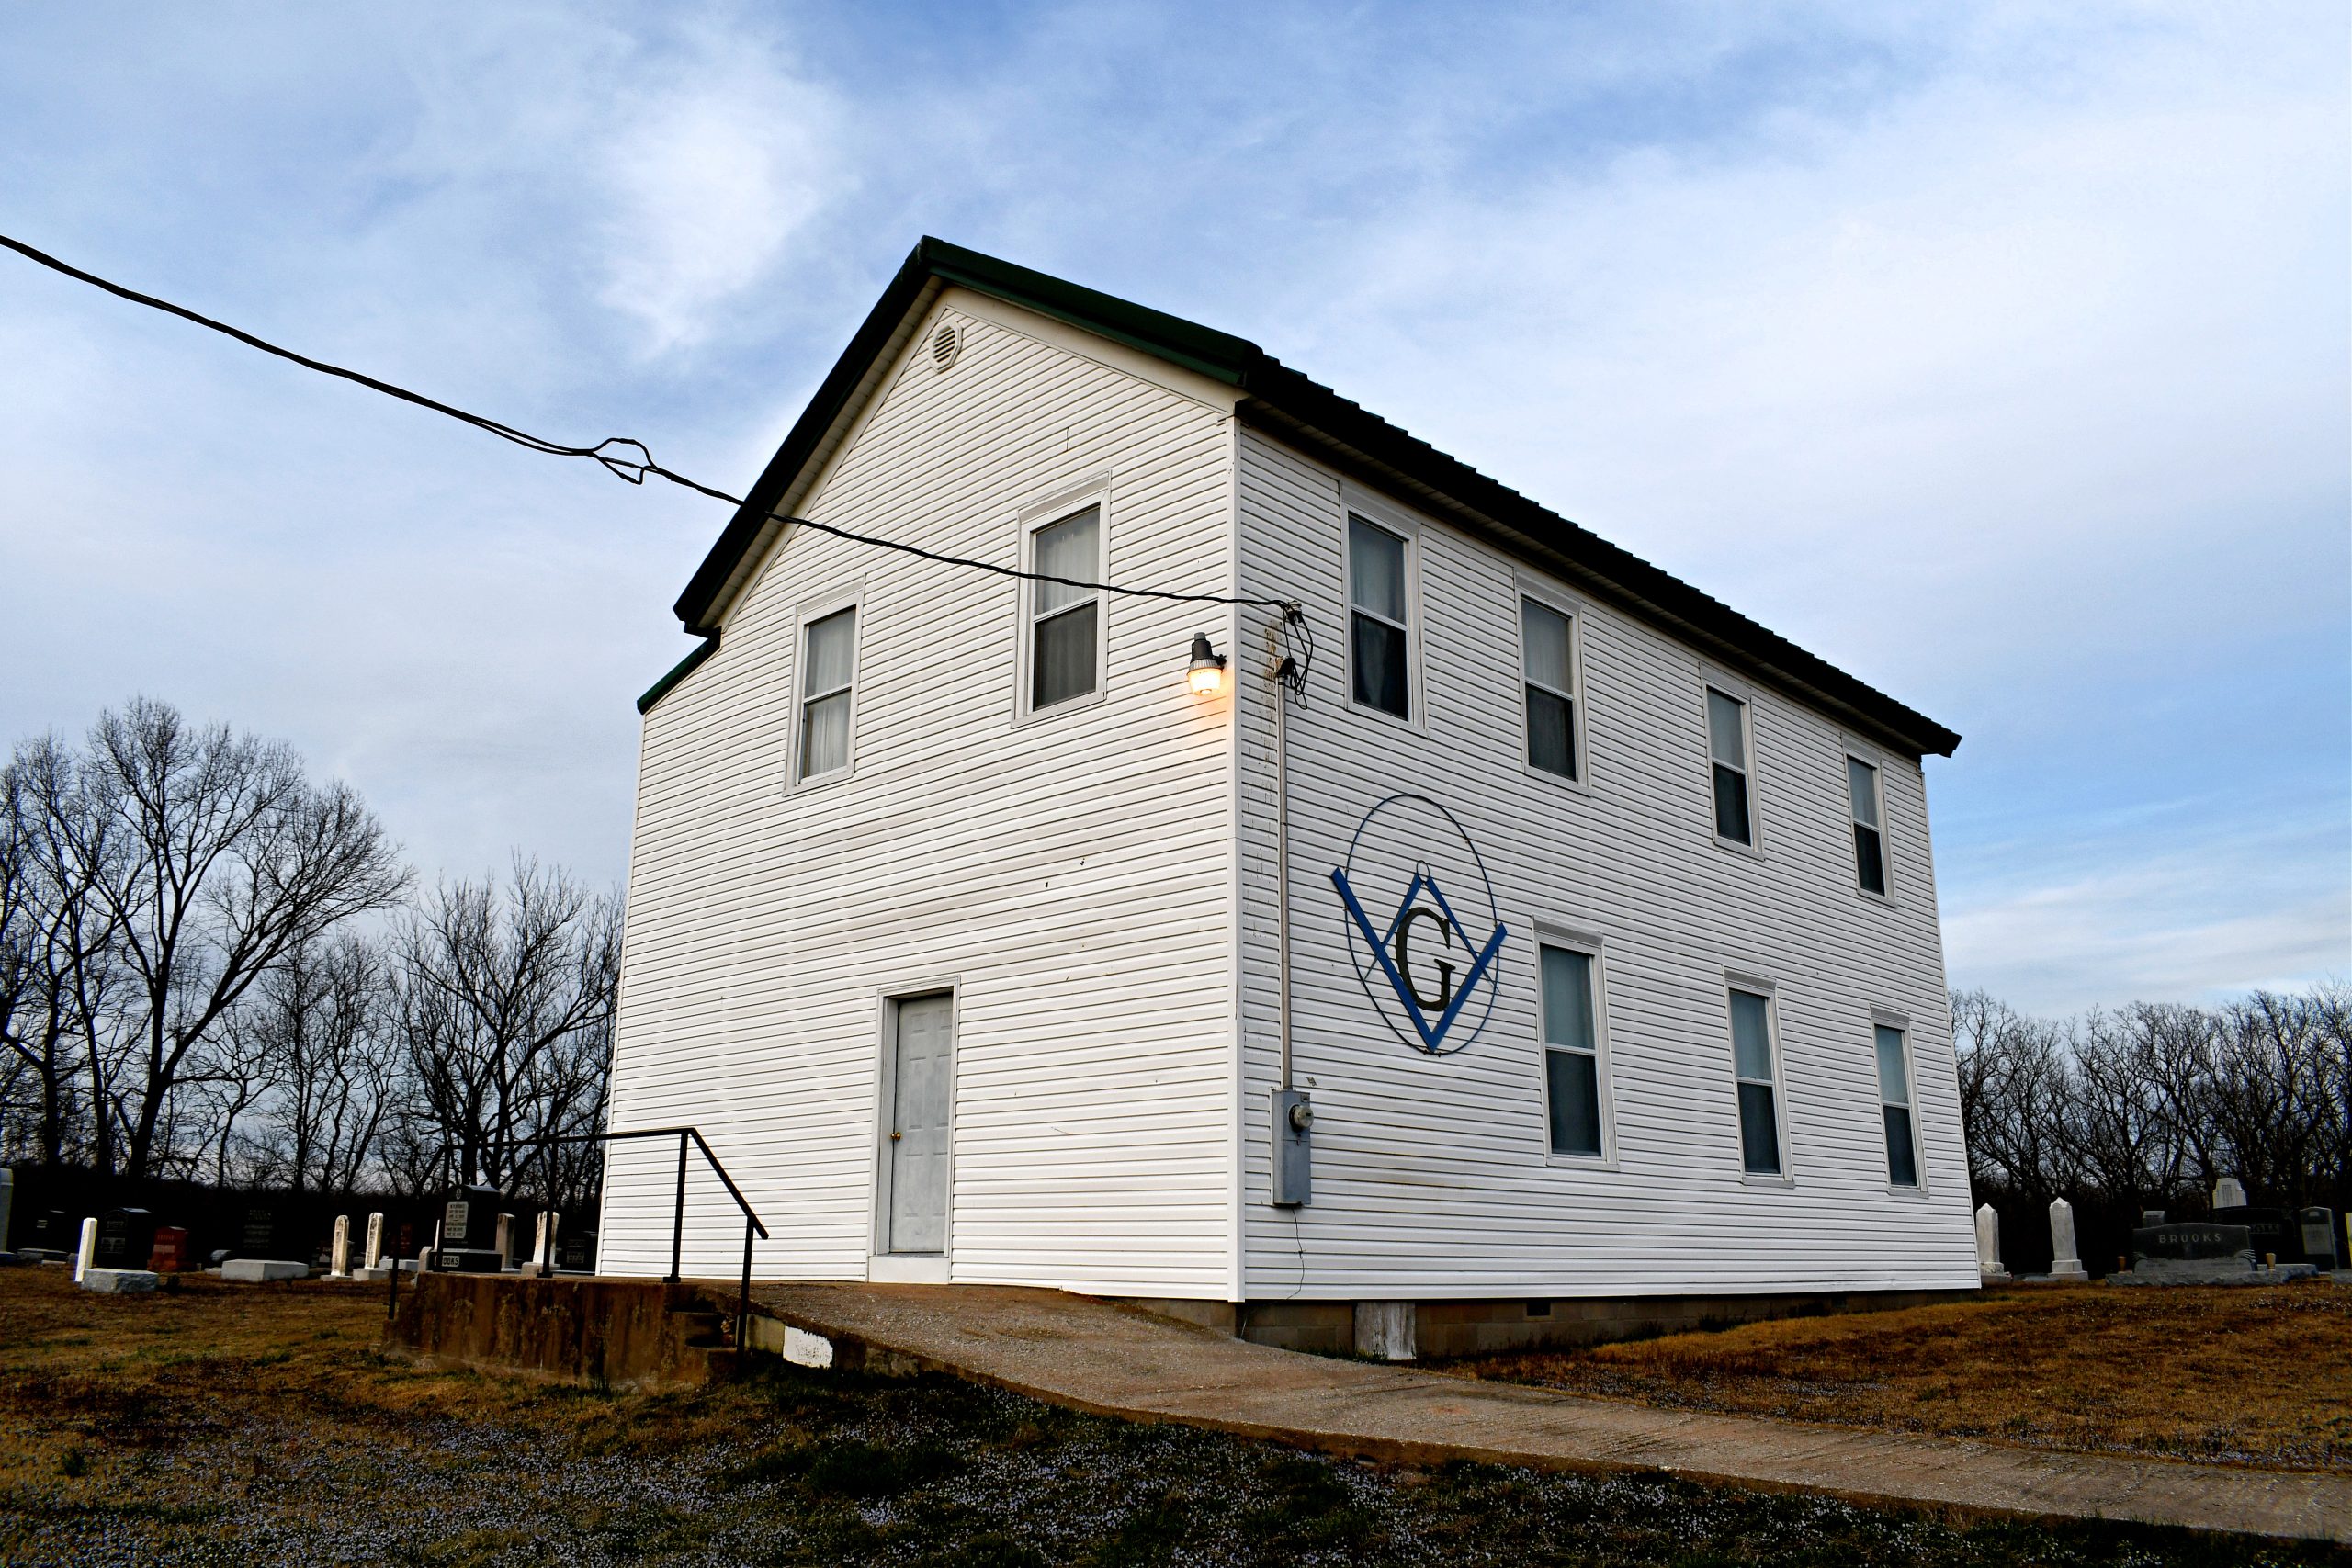 Exterior photo of an old Masonic lodge